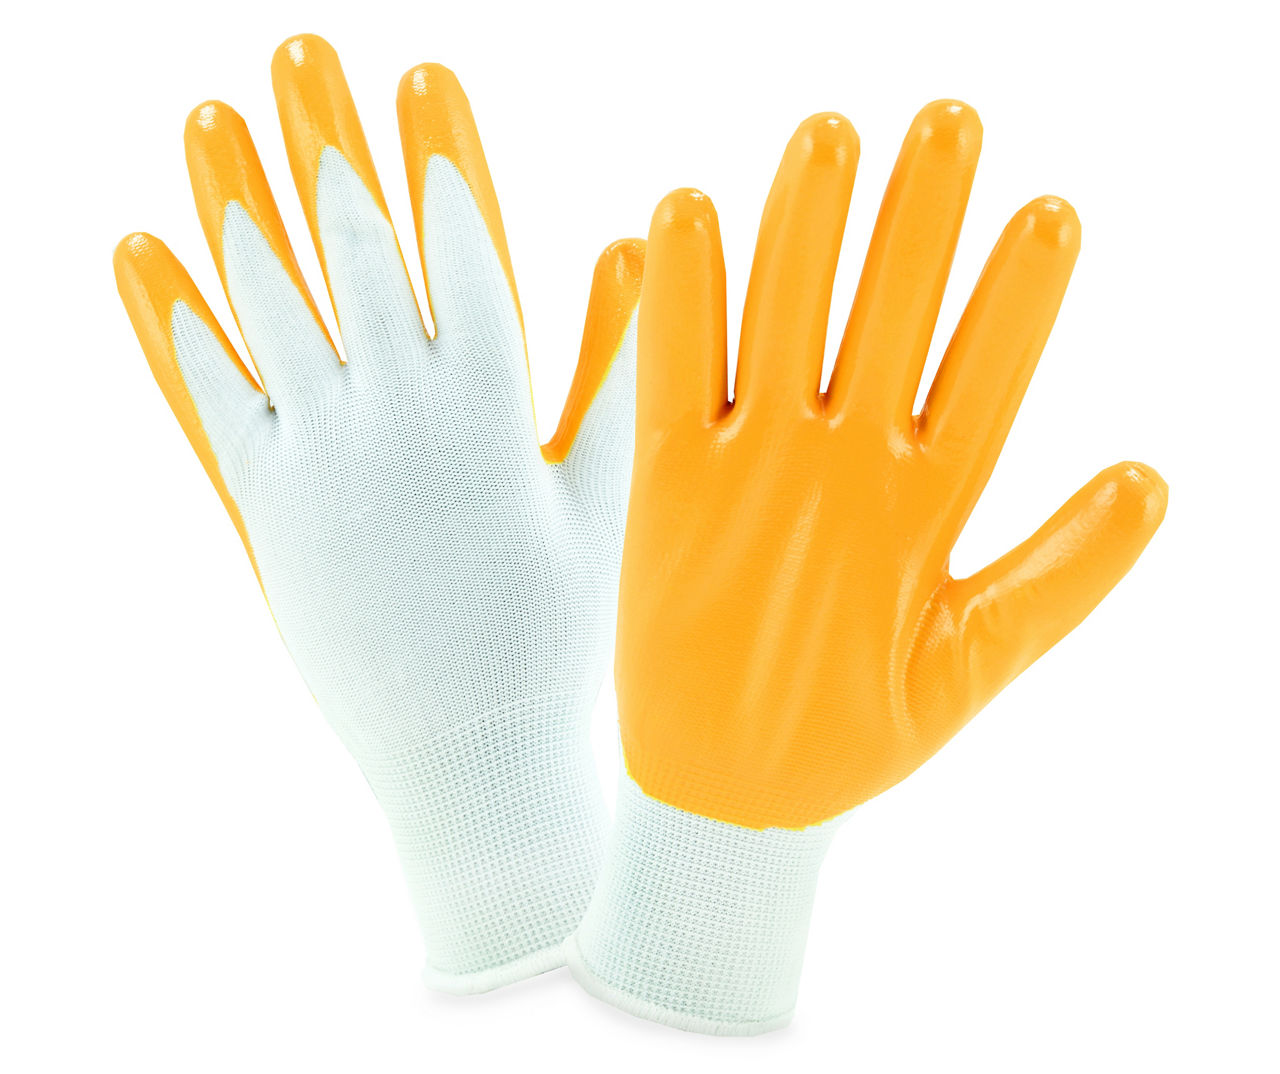 Comfortable and Durable Work and Jobsite Gloves